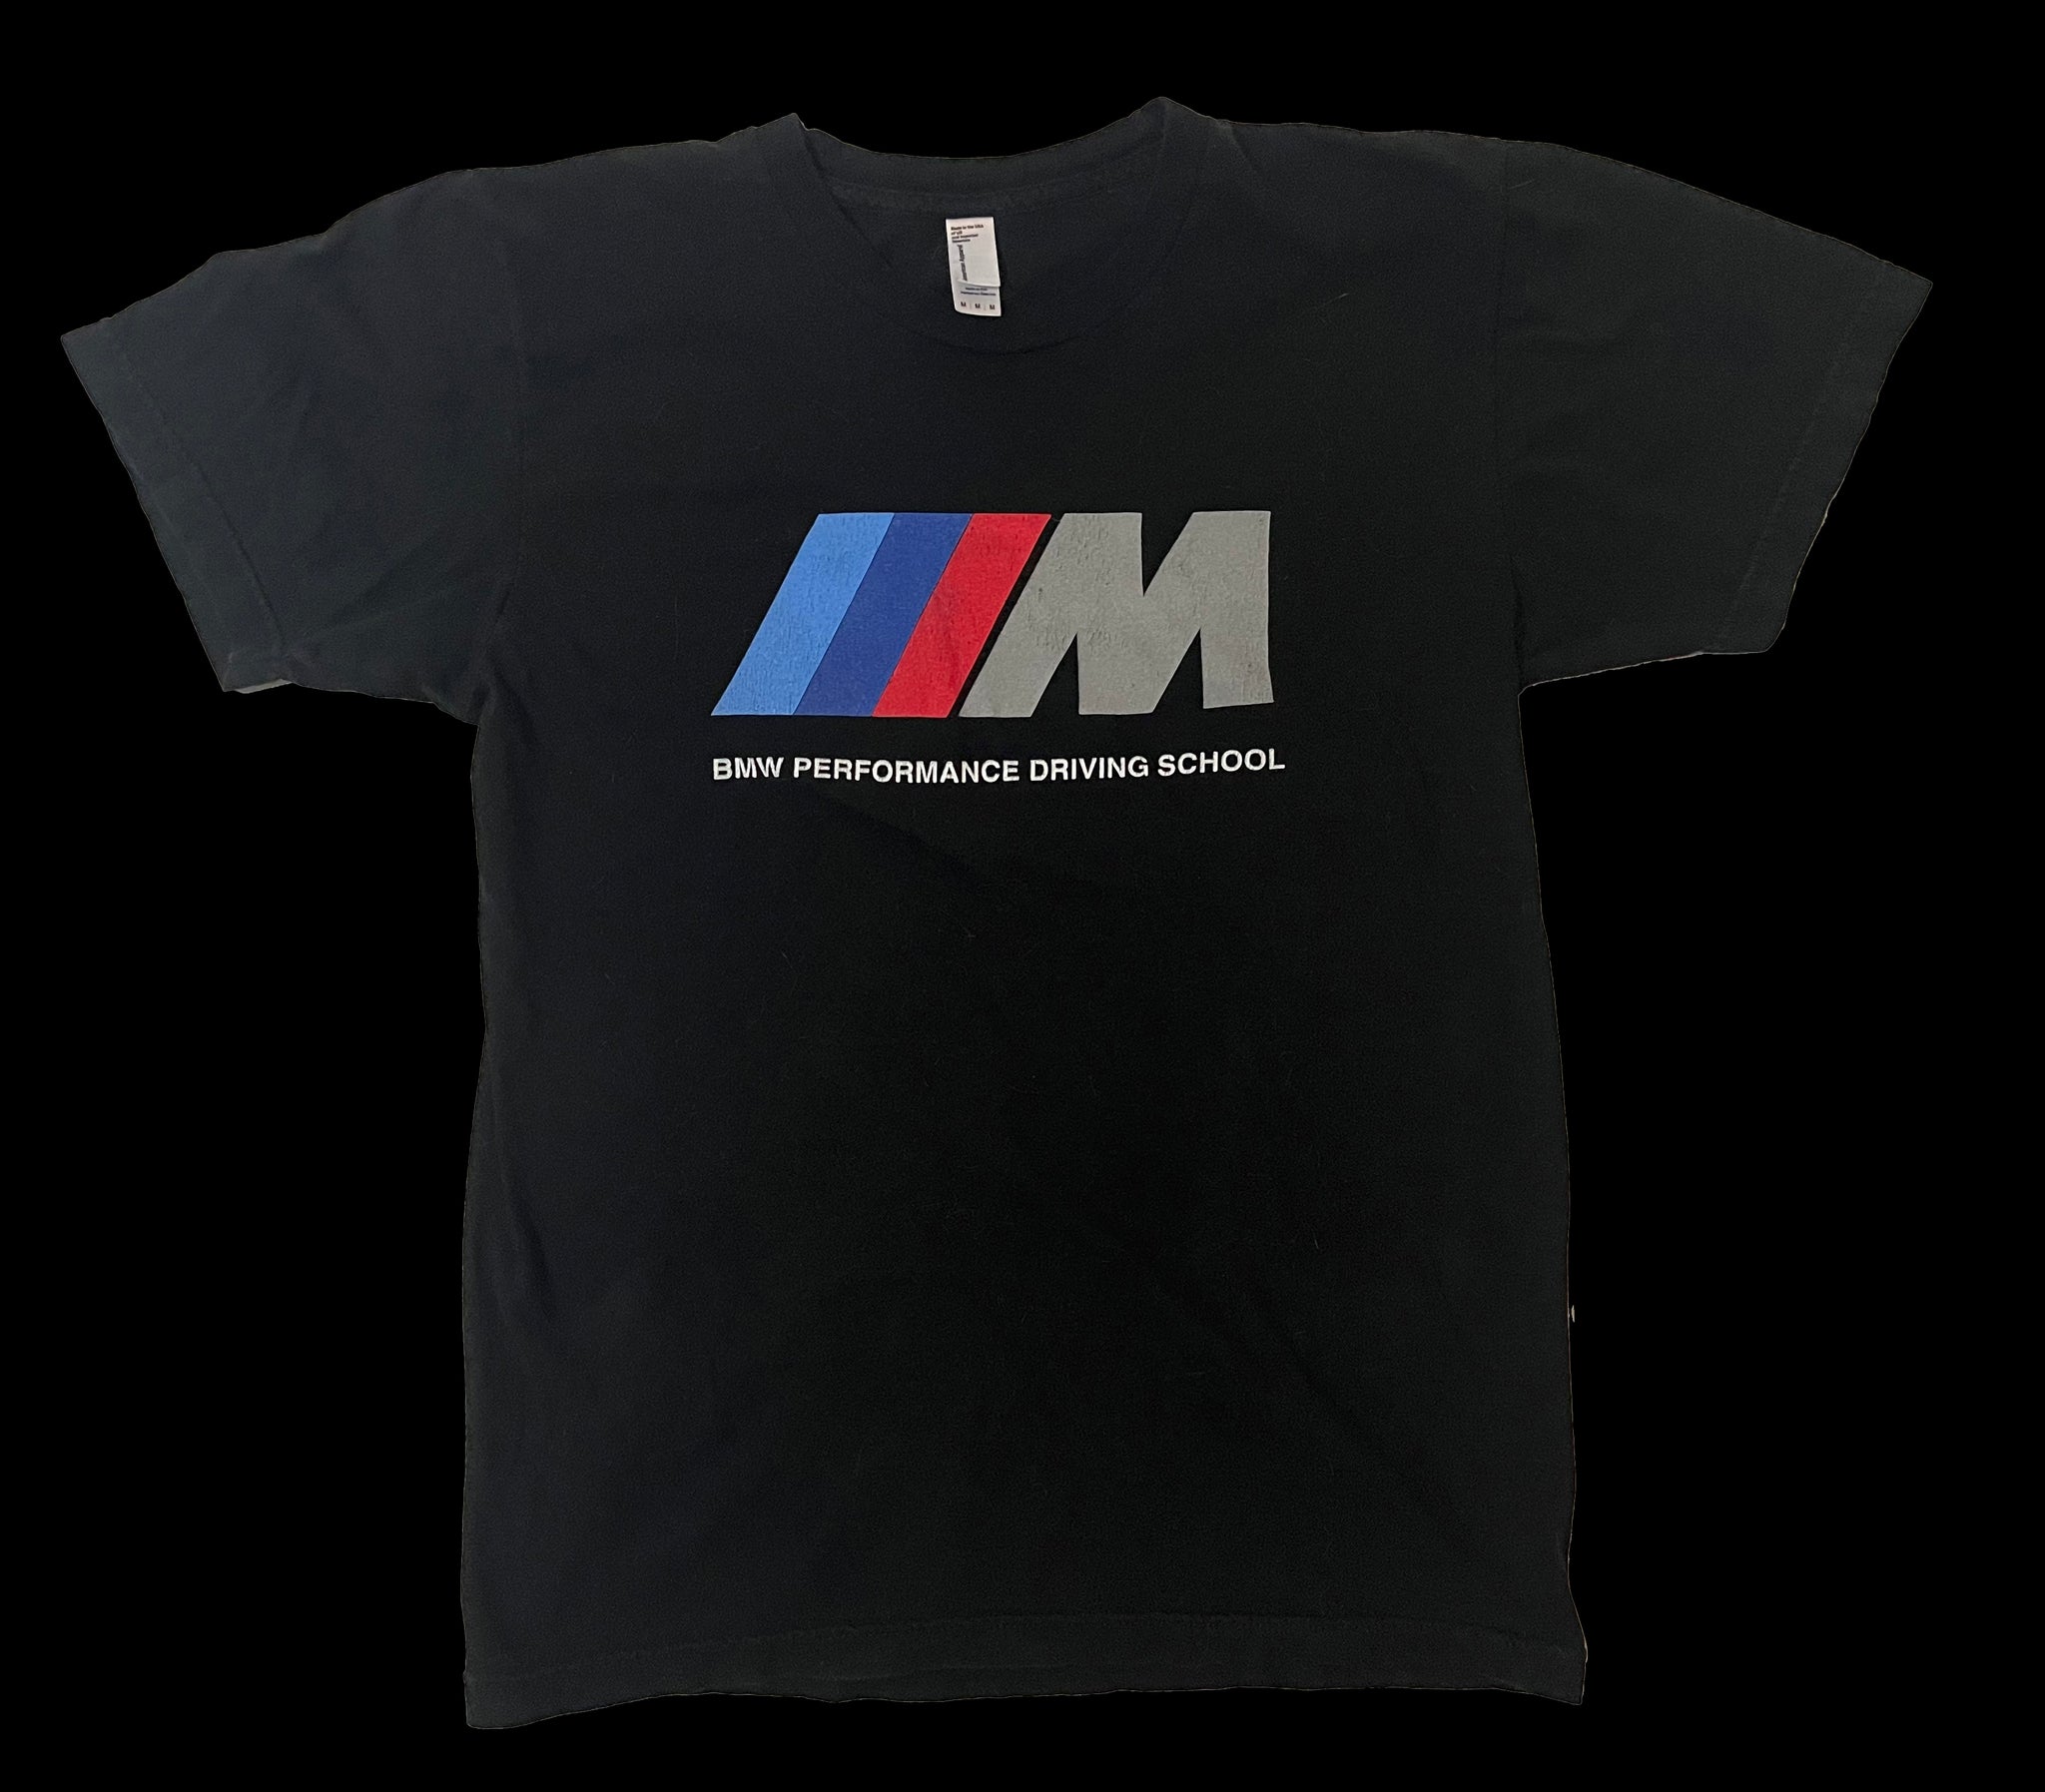 BMW PERFORMANCE DRIVING SCHOOL T-SHIRT – Discount Beepers